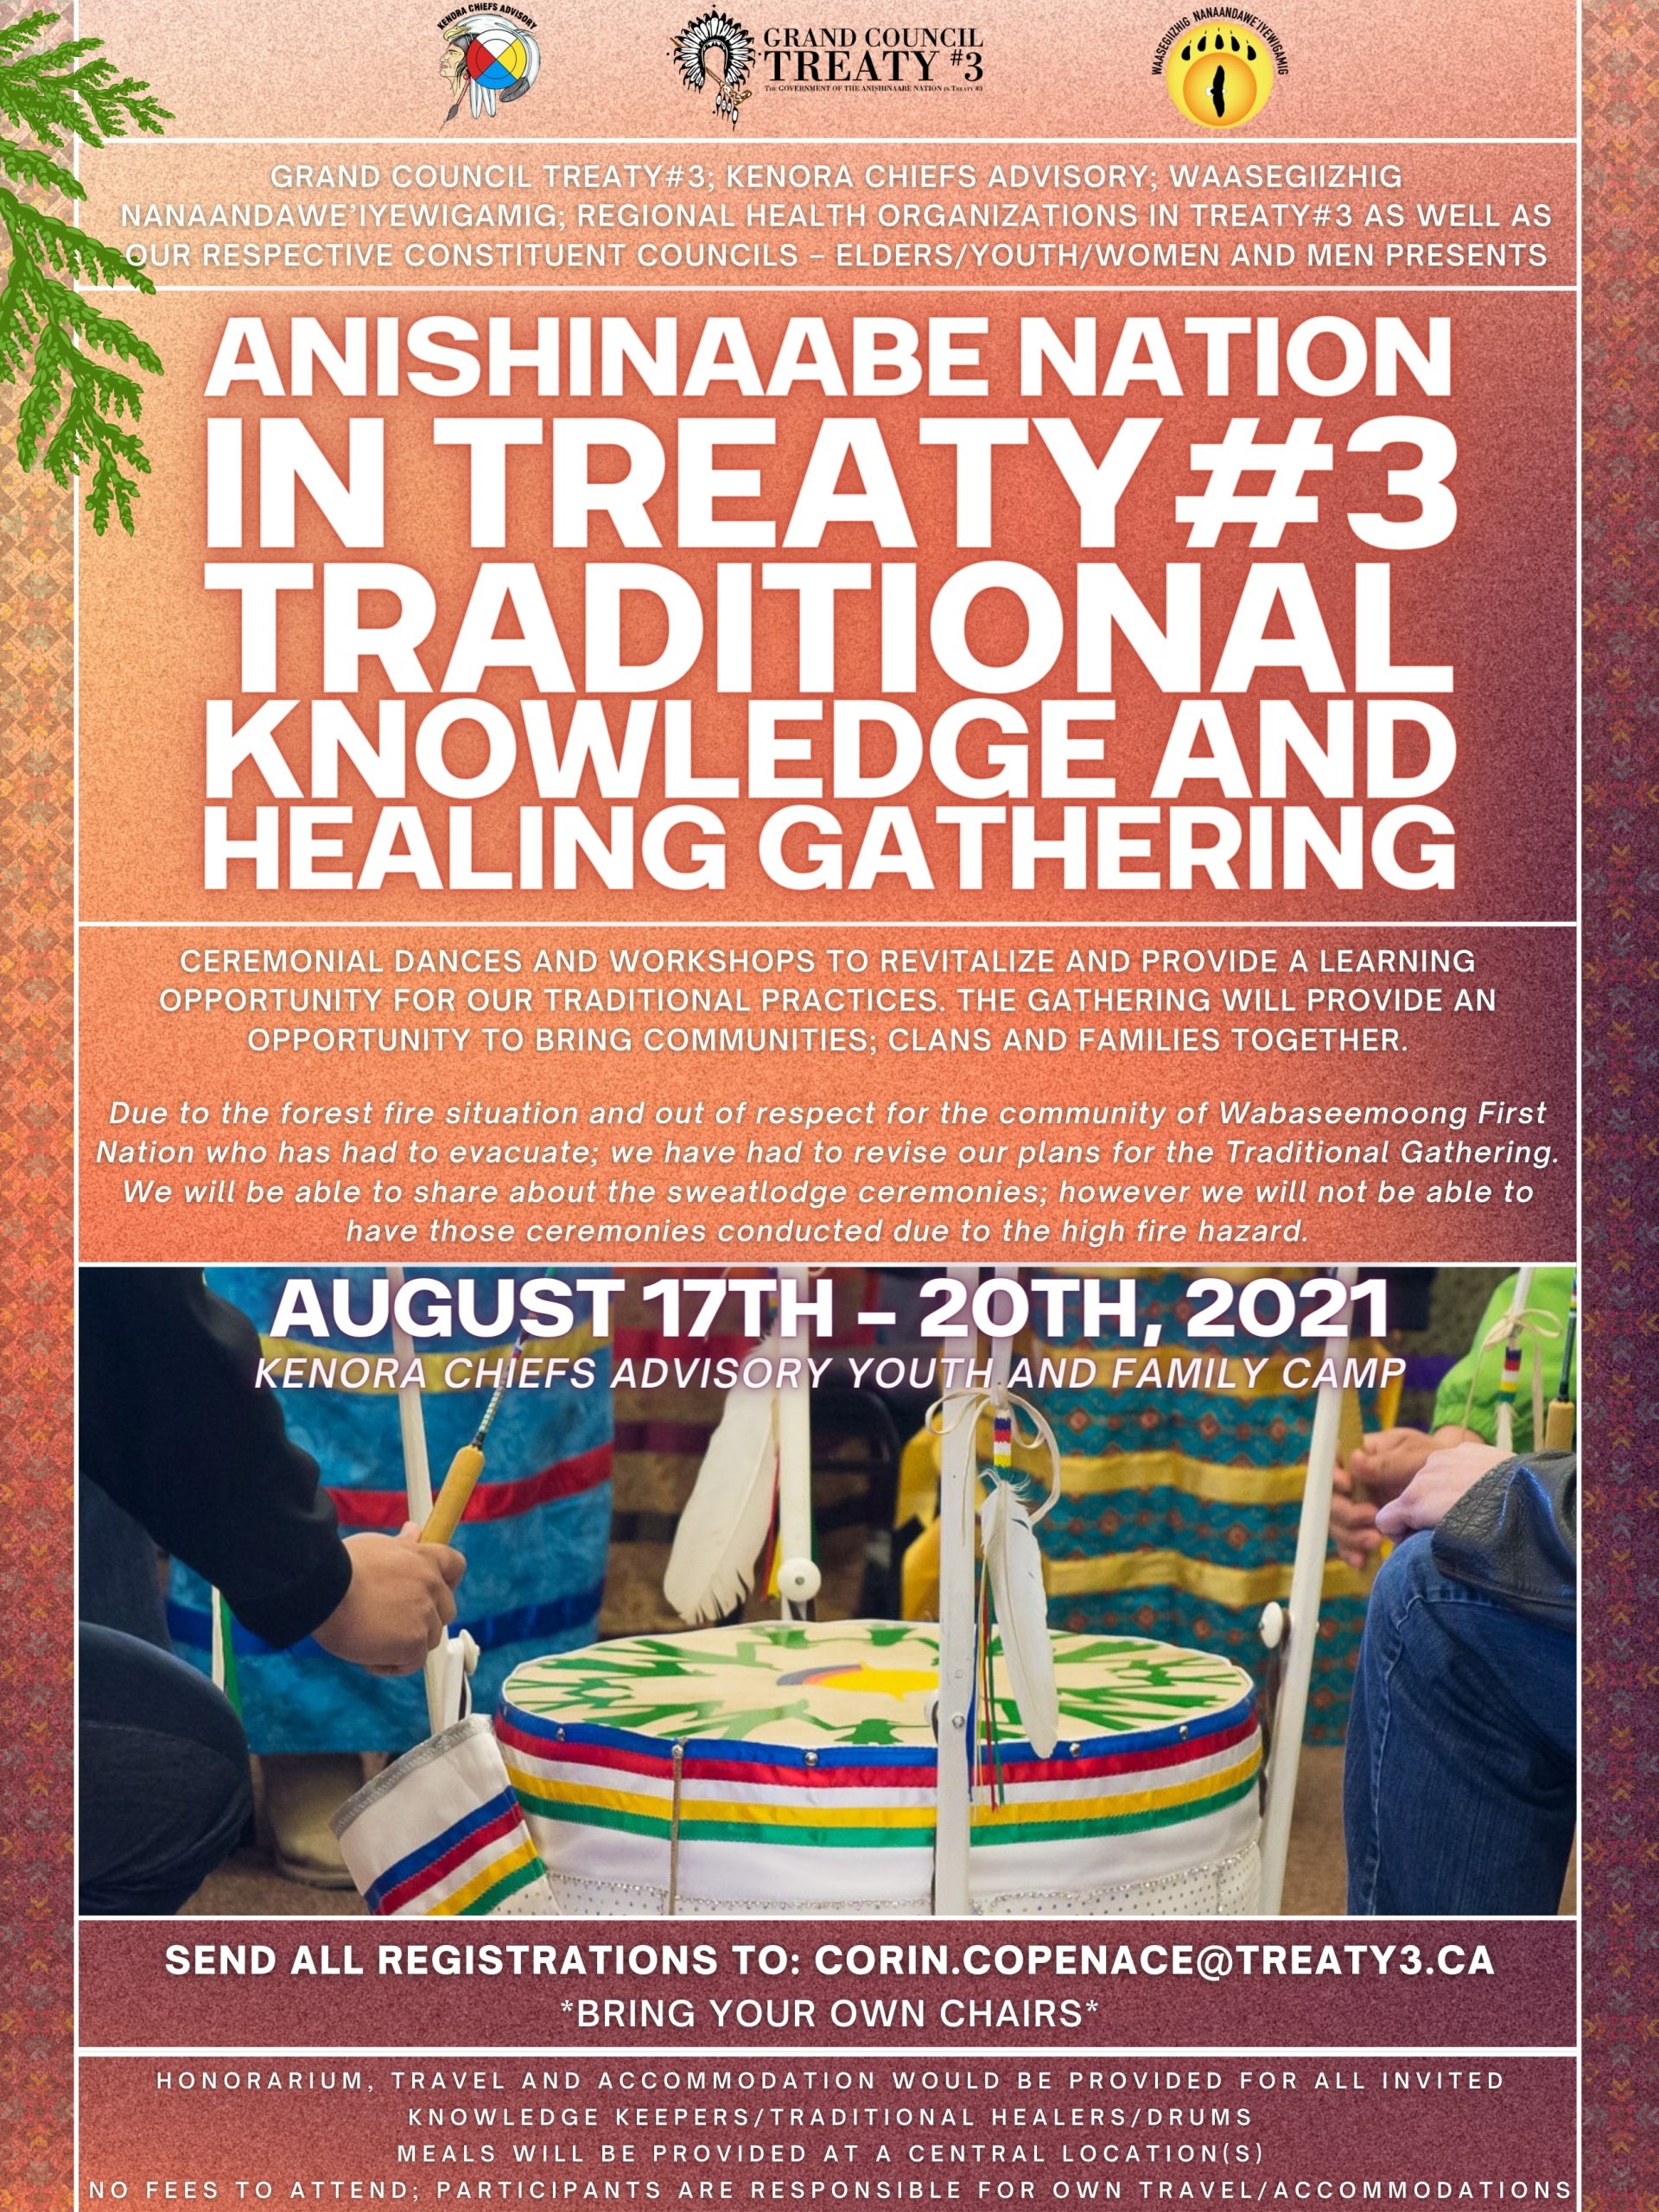 Anishinaabe Nation in Treaty #3 Traditional Knowledge and Healing Gathering